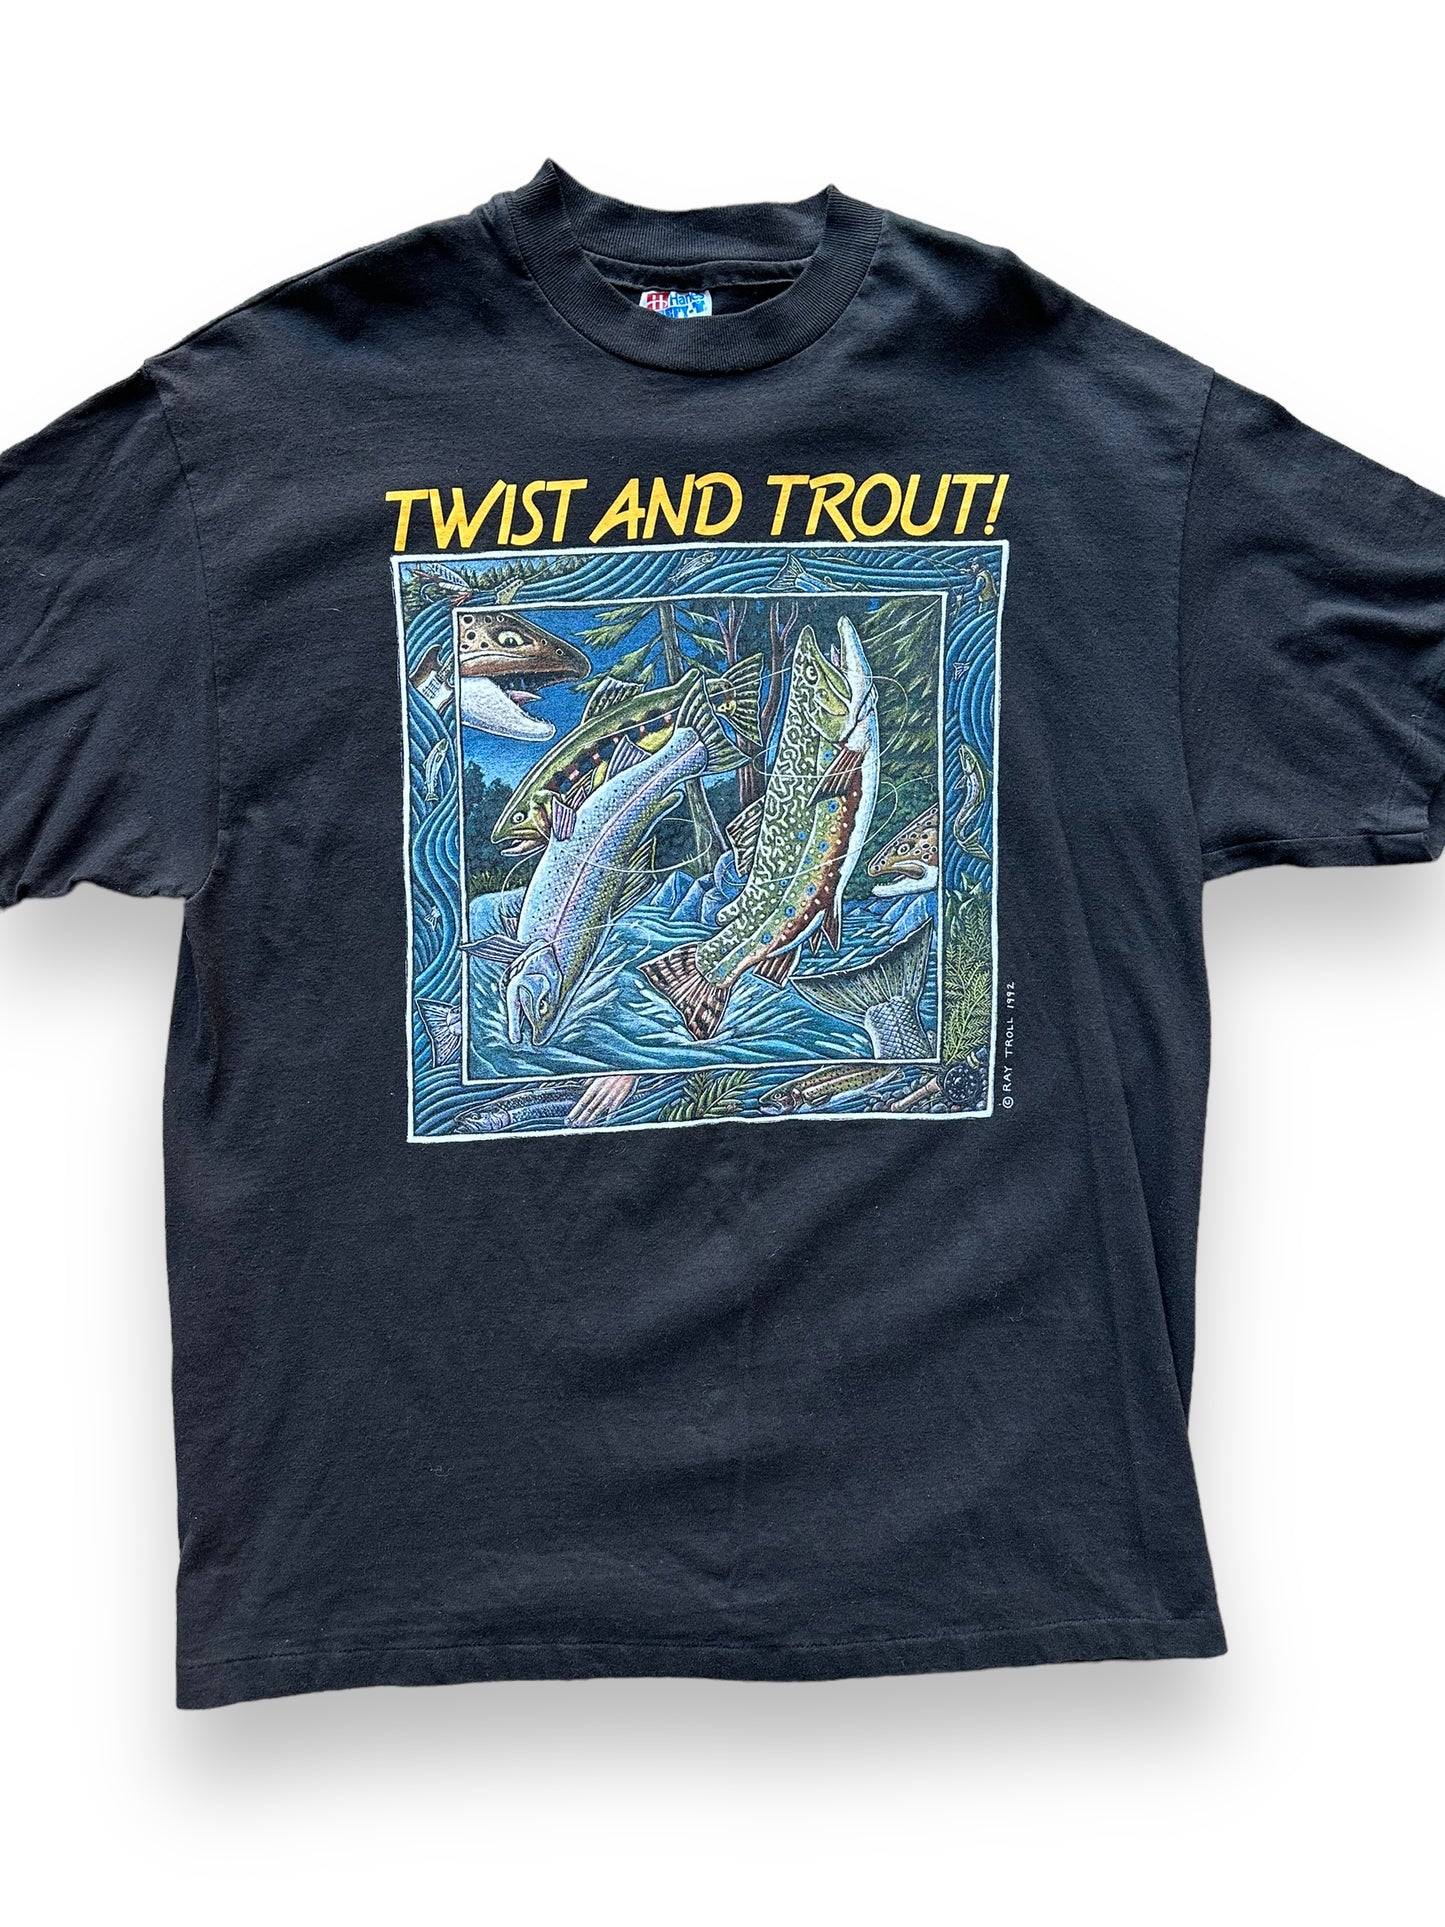 Front close up of Vintage Ray Troll Twist and Trout Tee SZ L |  Vintage Fishing Tee Seattle | Barn Owl Vintage